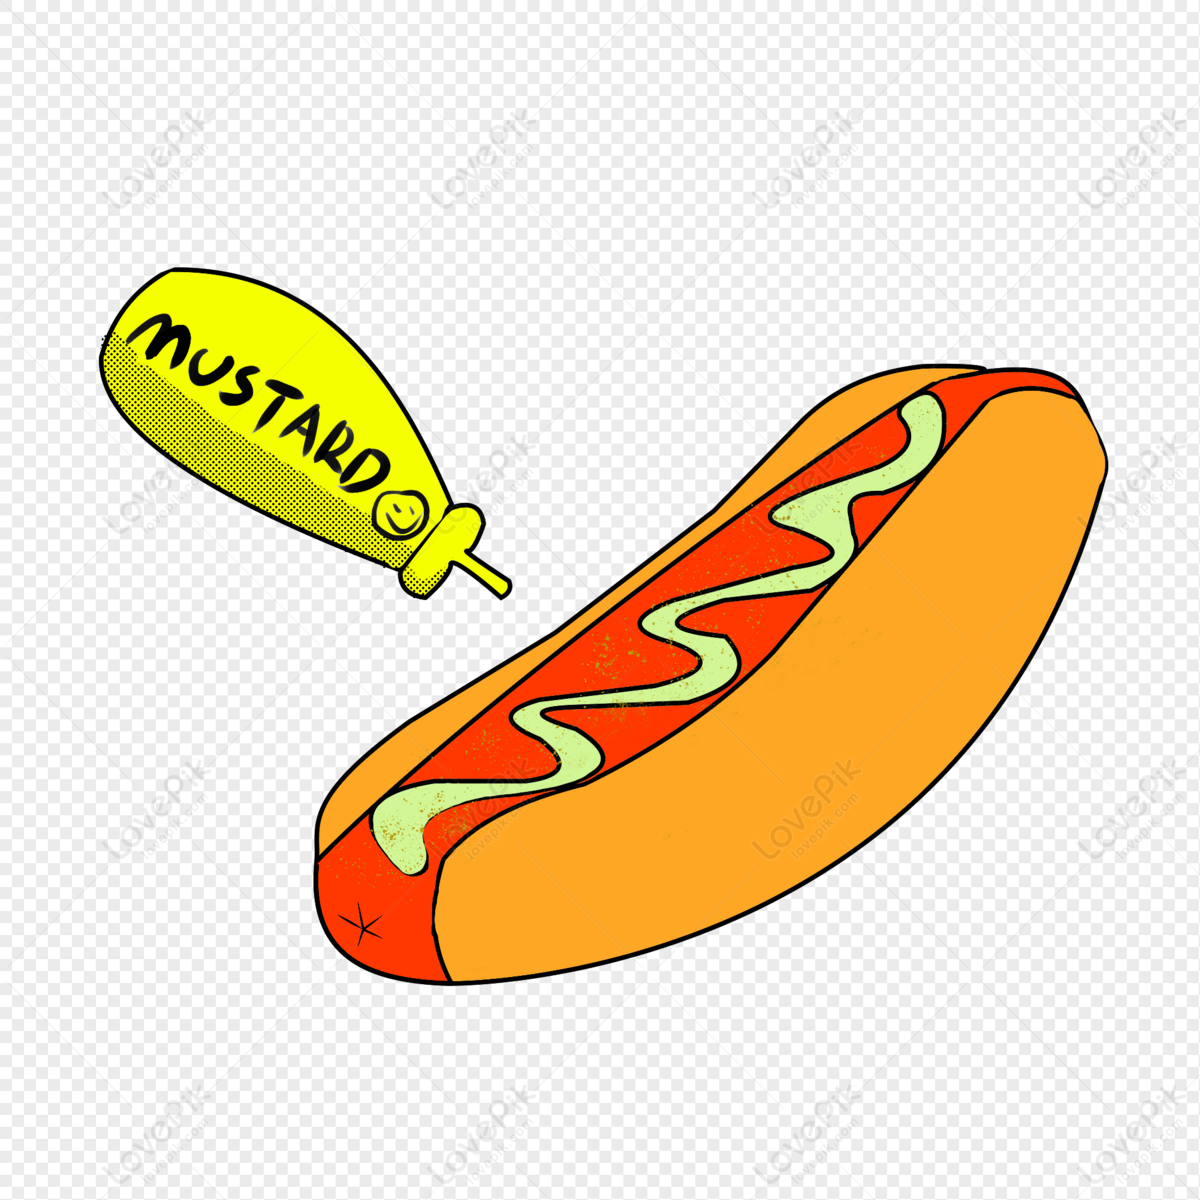 Hot Dog Hand Drawn Png Transparent Image And Clipart Image For Free  Download - Lovepik | 401387617